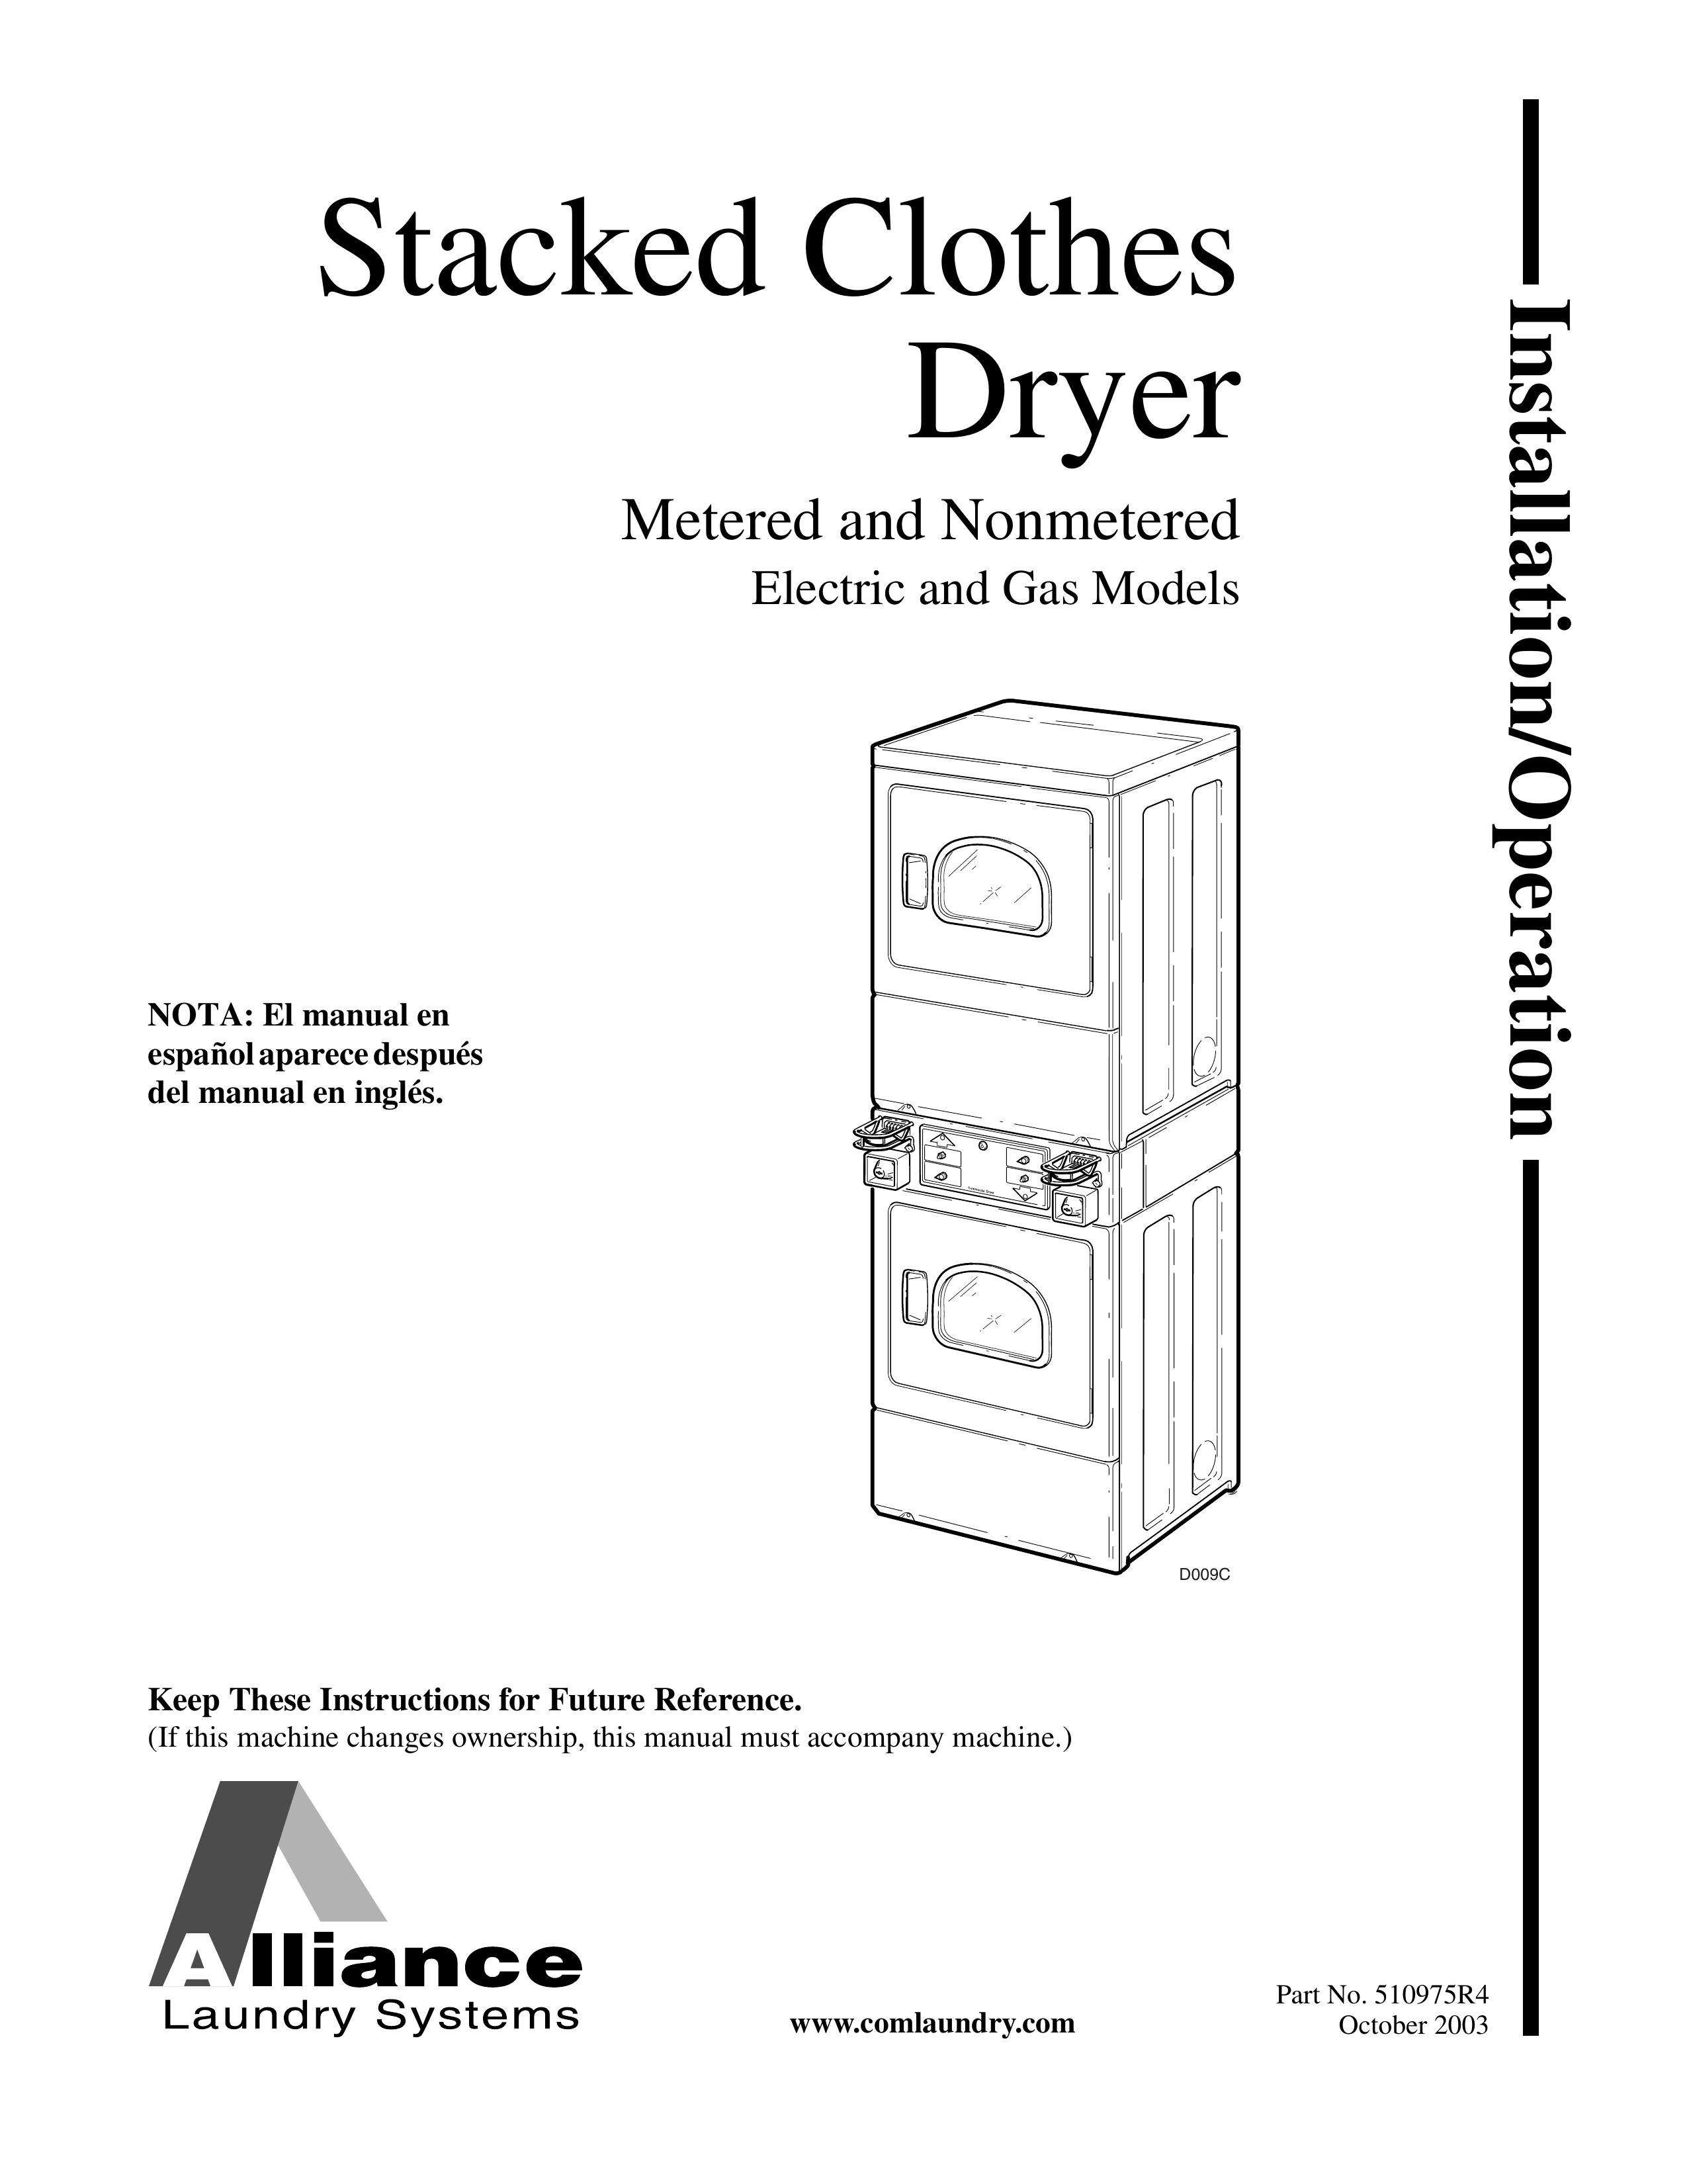 Alliance Laundry Systems Stacked Clothes Dryer Washer/Dryer User Manual (Page 1)